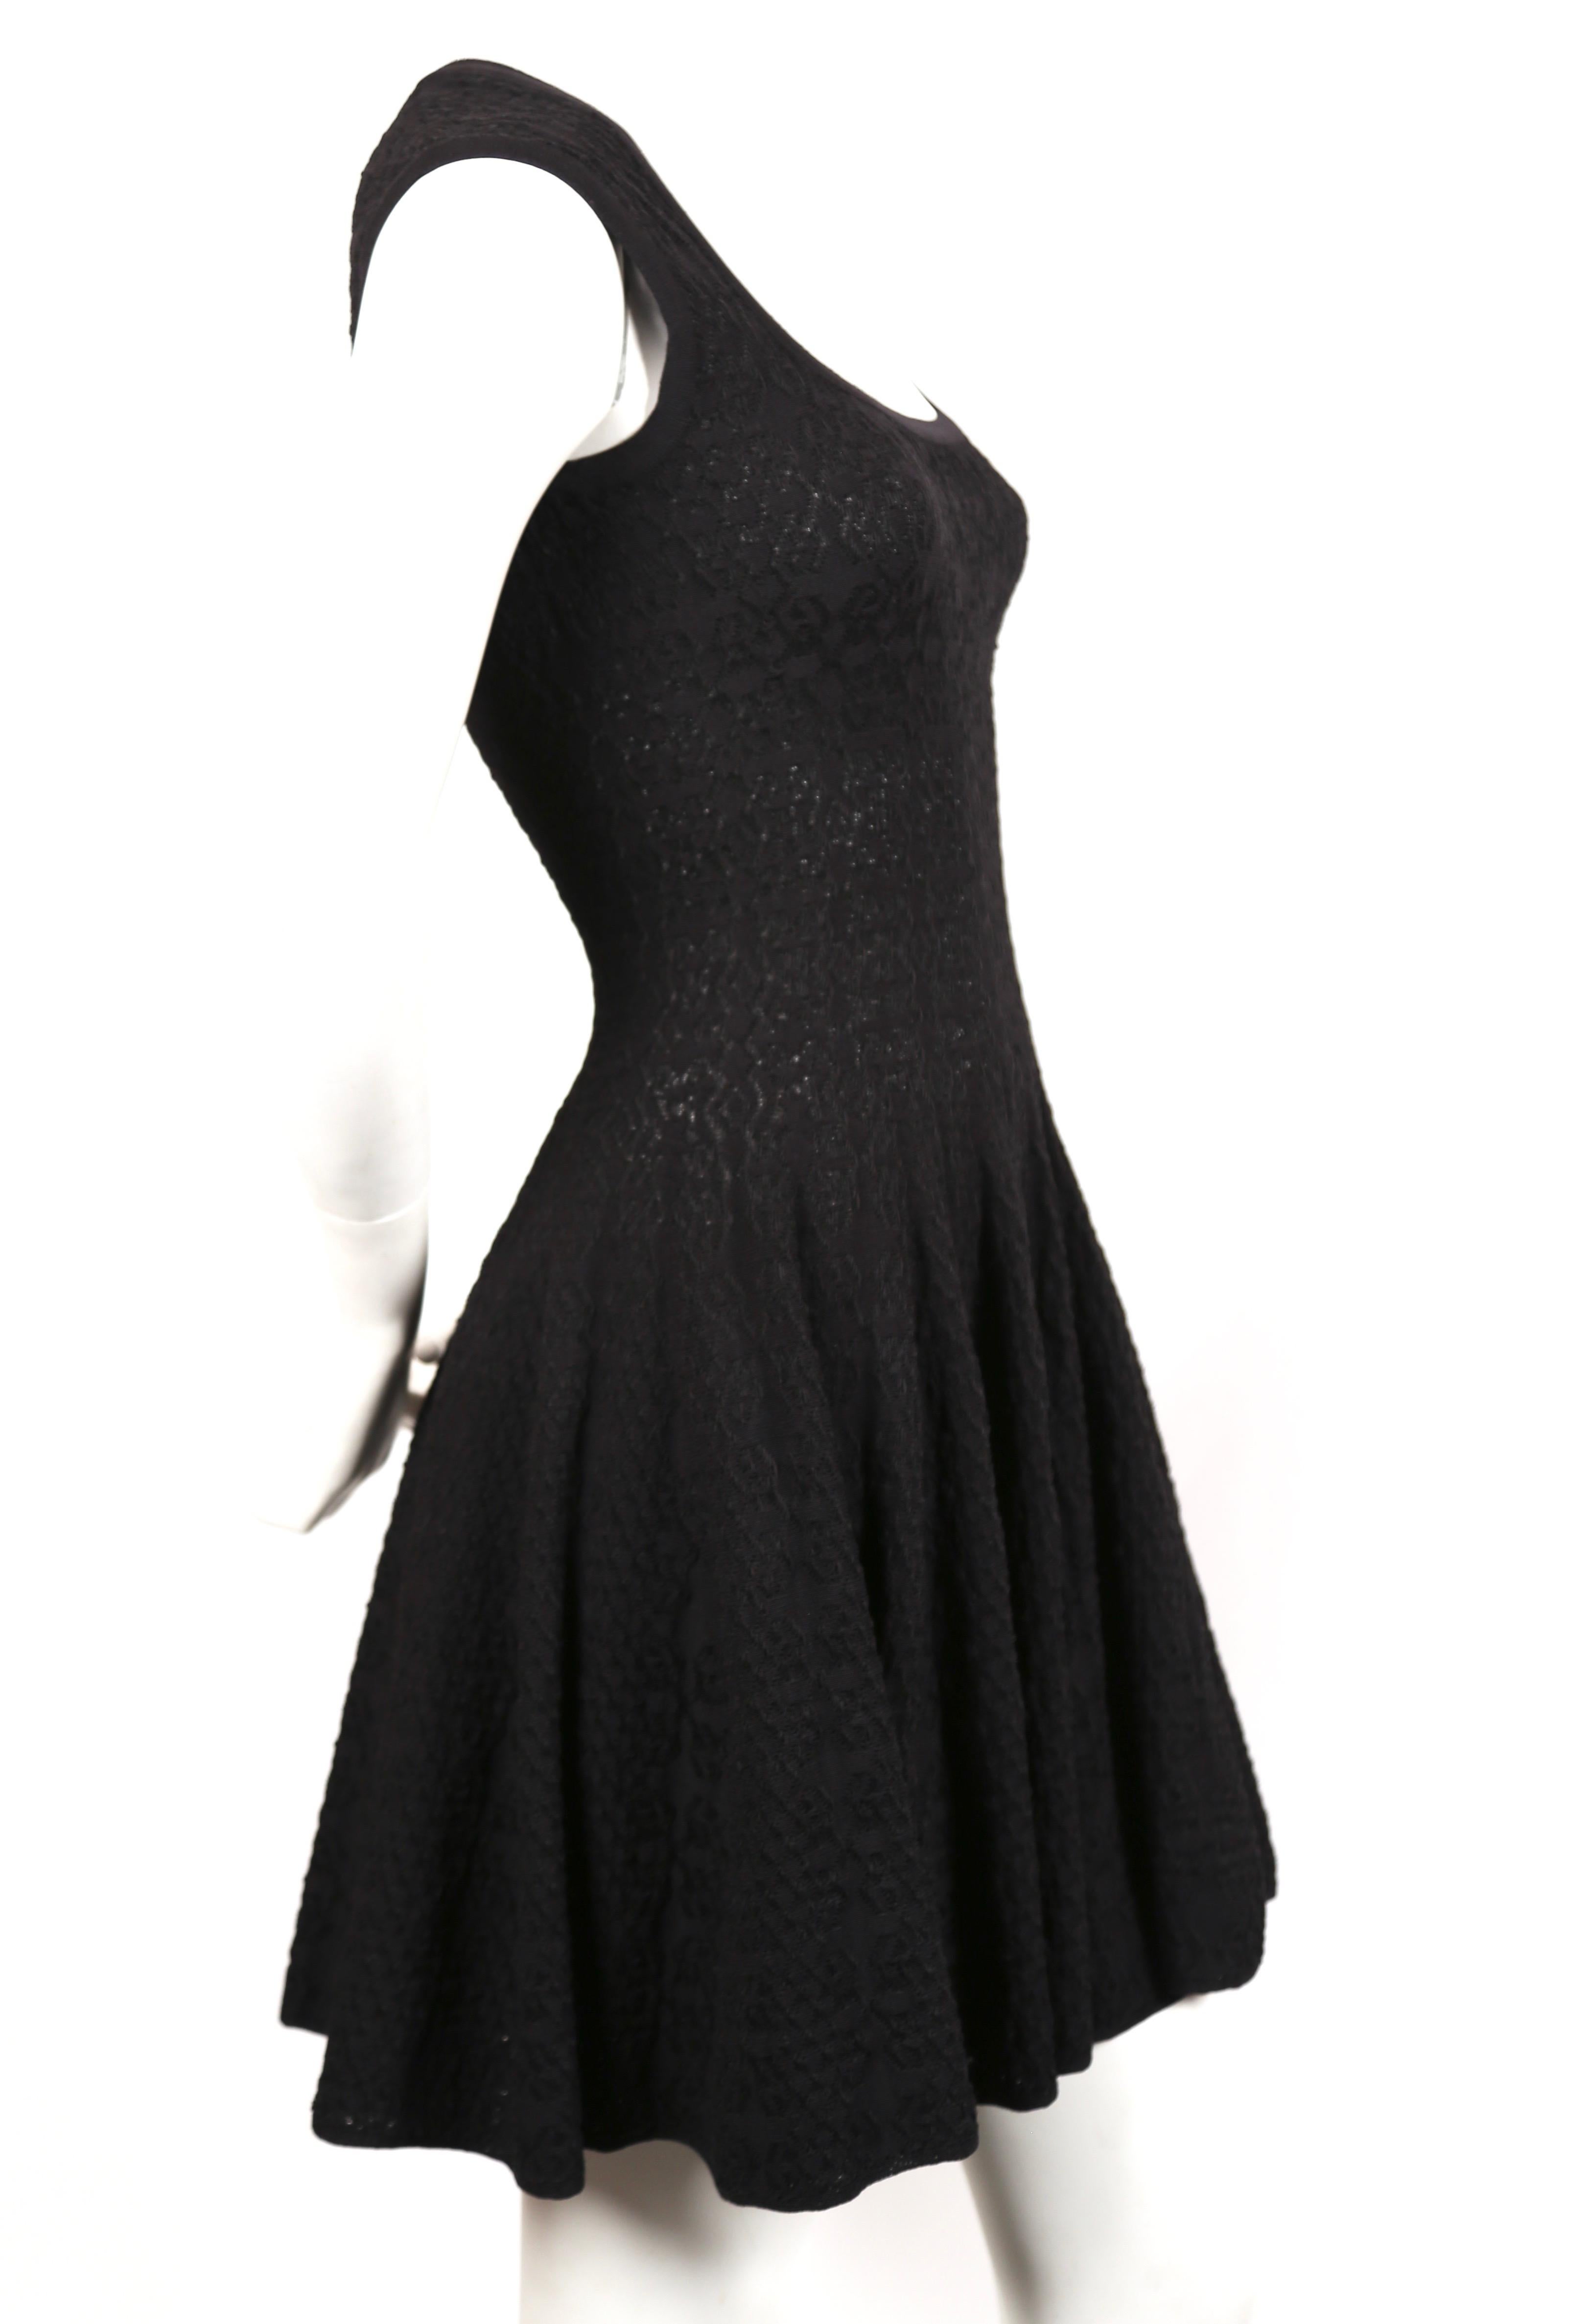 Black knit 'Muguet' dress by Azzedine Alaia. Labeled a French size 38 however this best fits a French 36. Measurements are approximately: bust 30